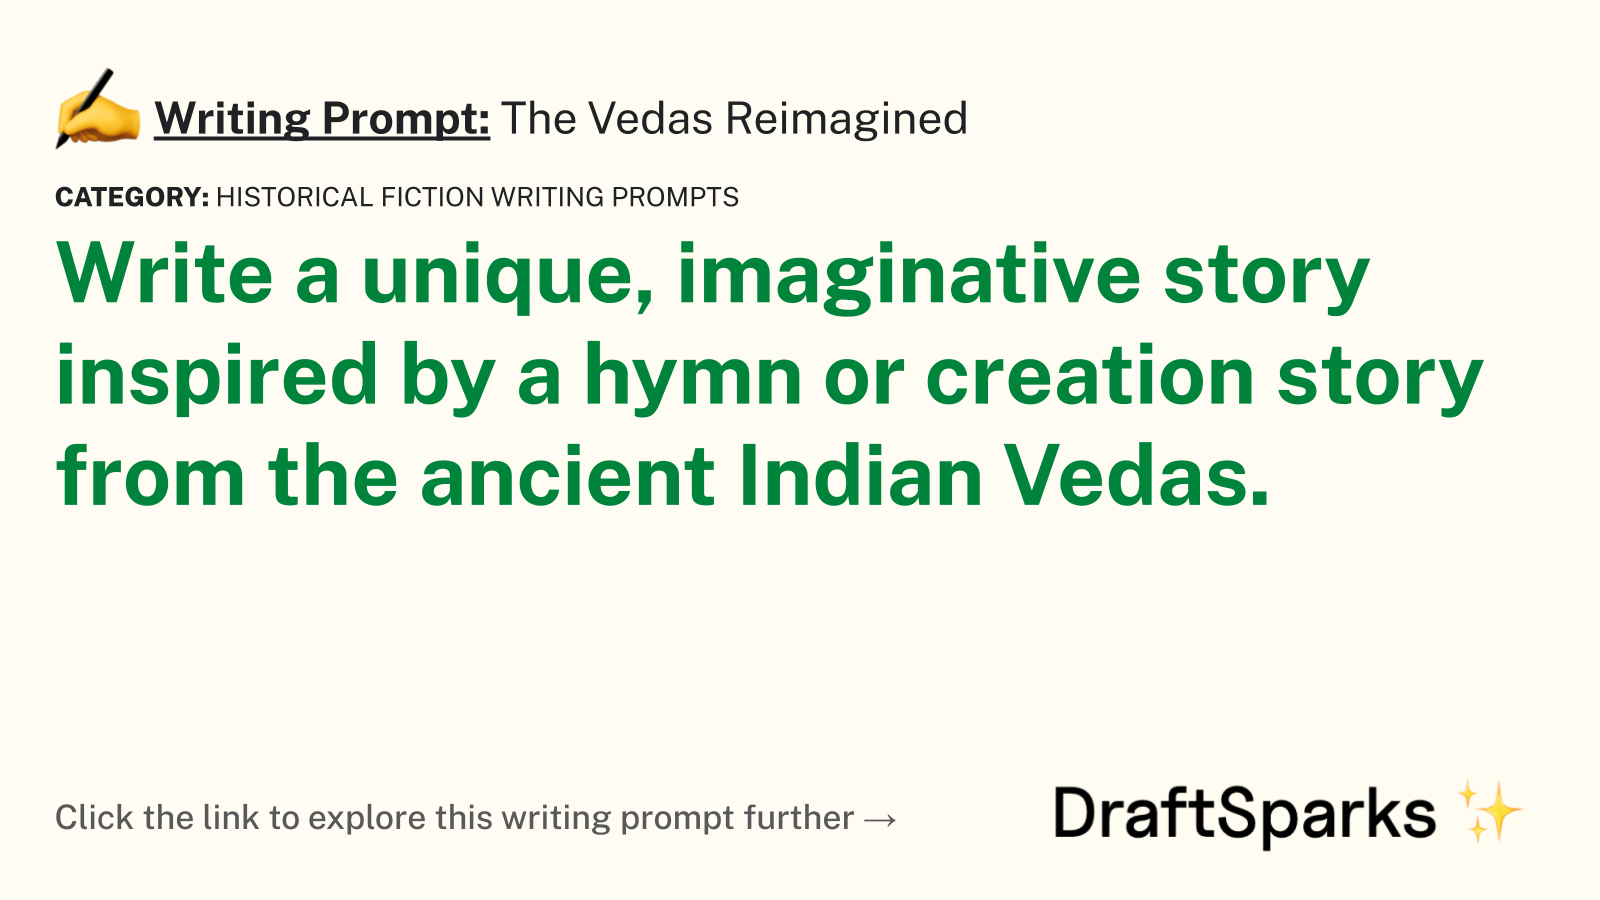 The Vedas Reimagined